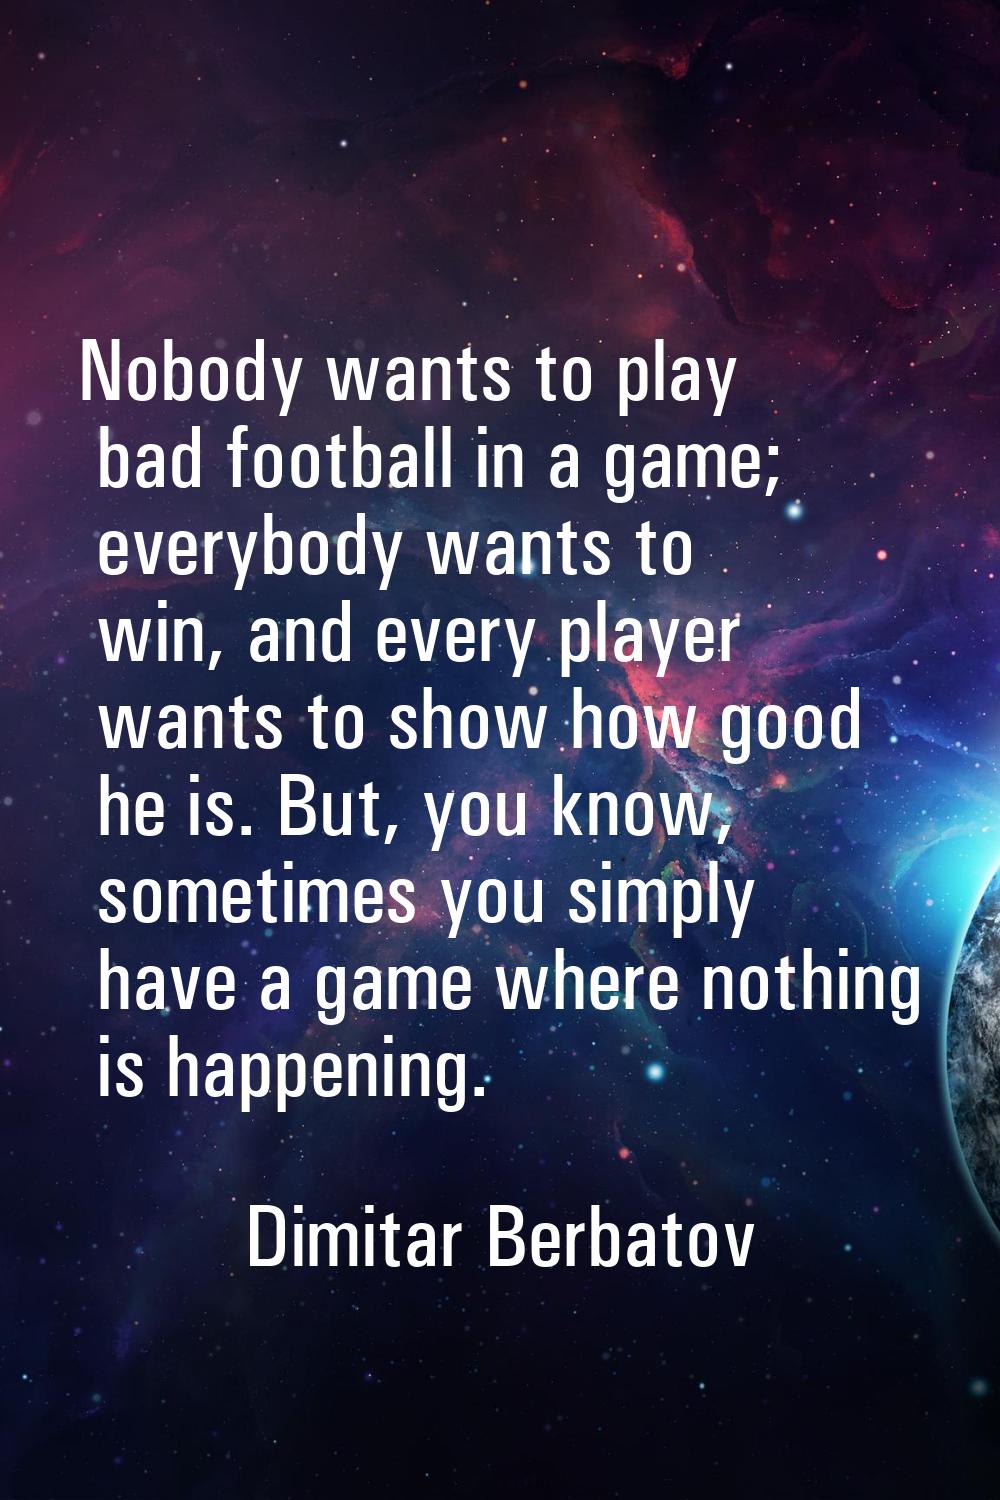 Nobody wants to play bad football in a game; everybody wants to win, and every player wants to show